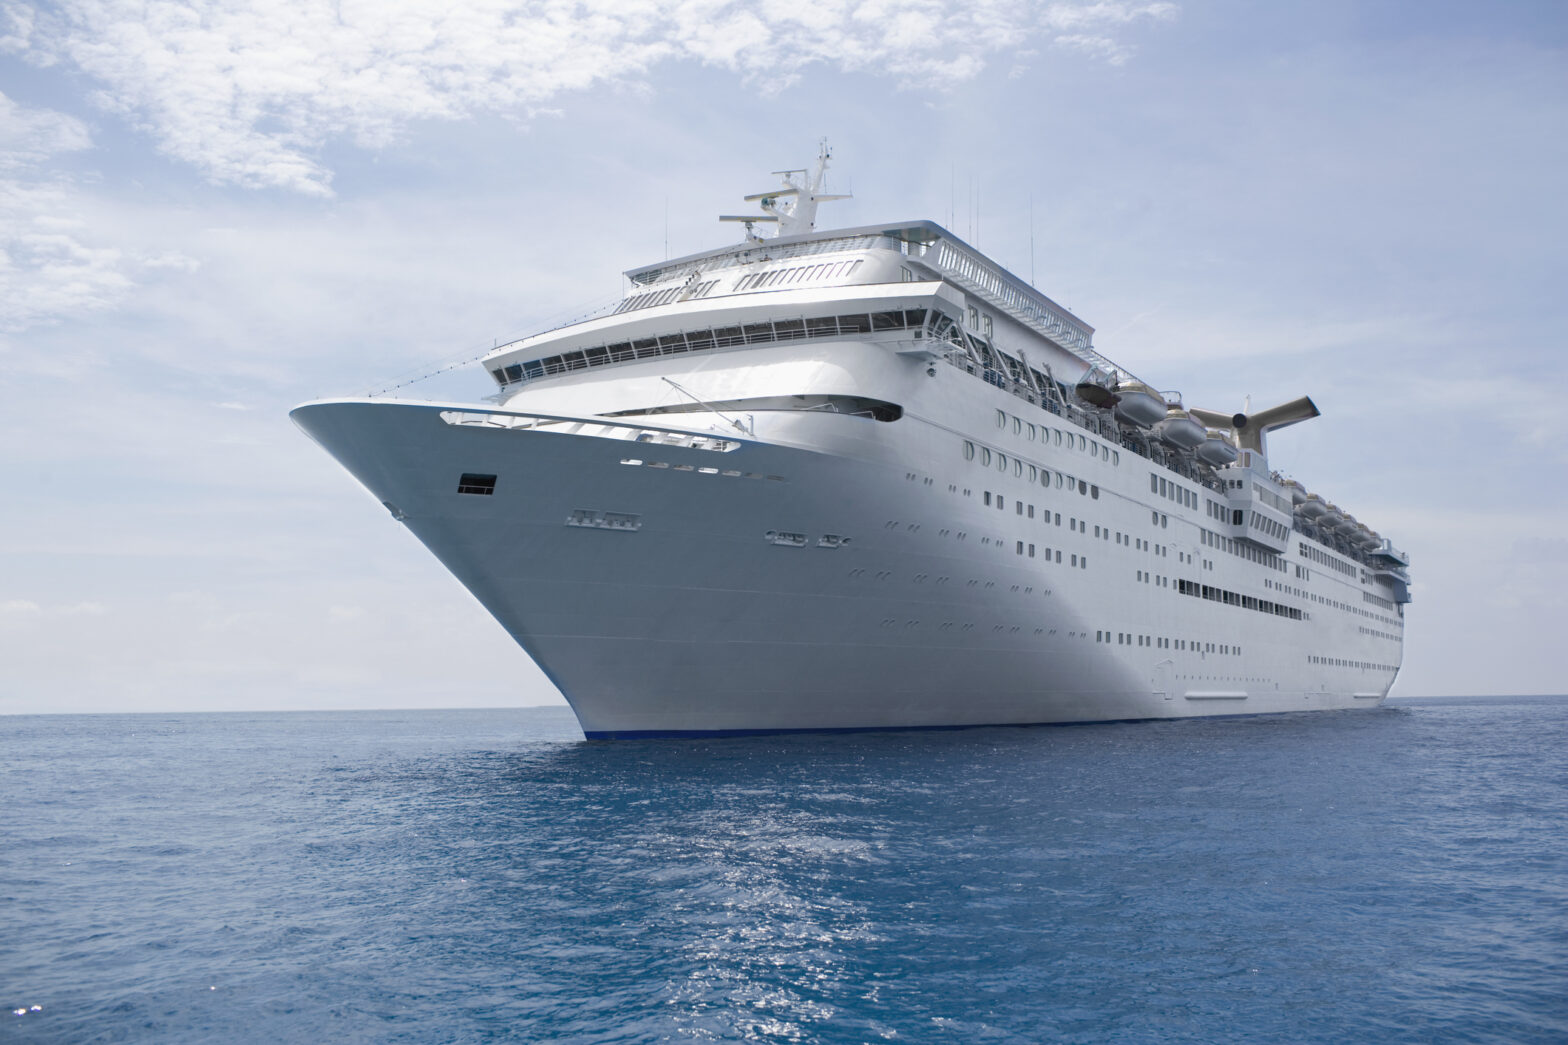 The World's Largest Cruise Ship is Almost Ready to Set Sail